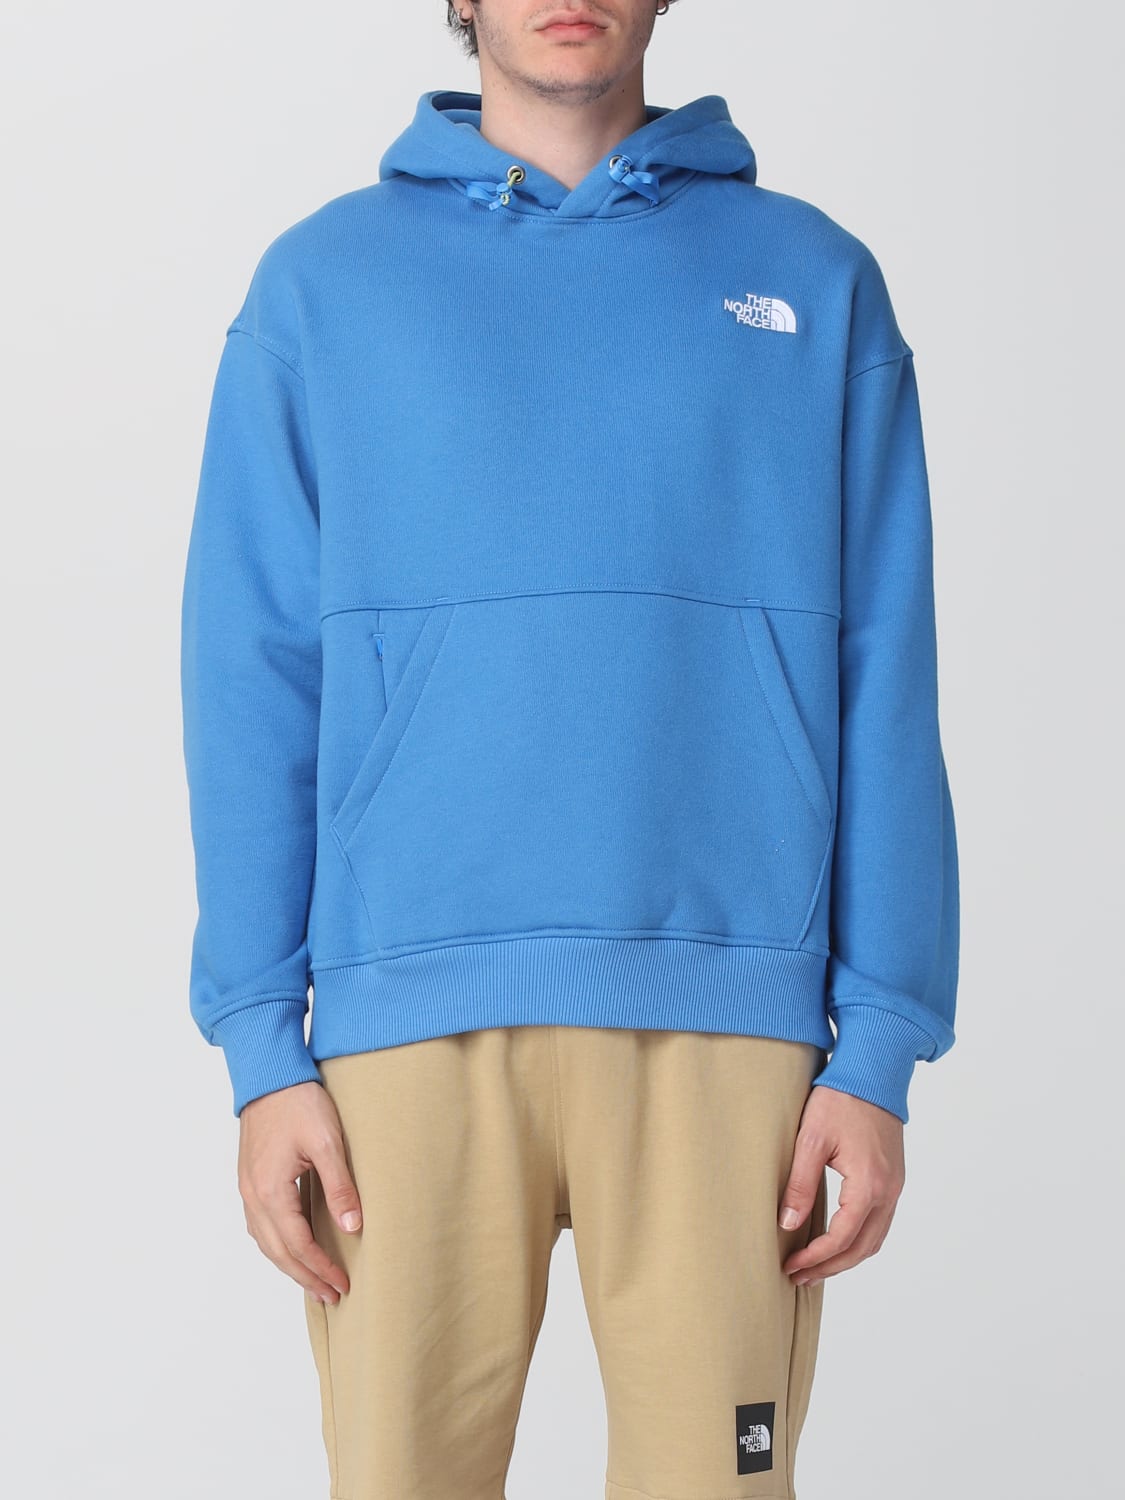 Sweatshirt The North Face: The North Face sweatshirt for man royal blue 2